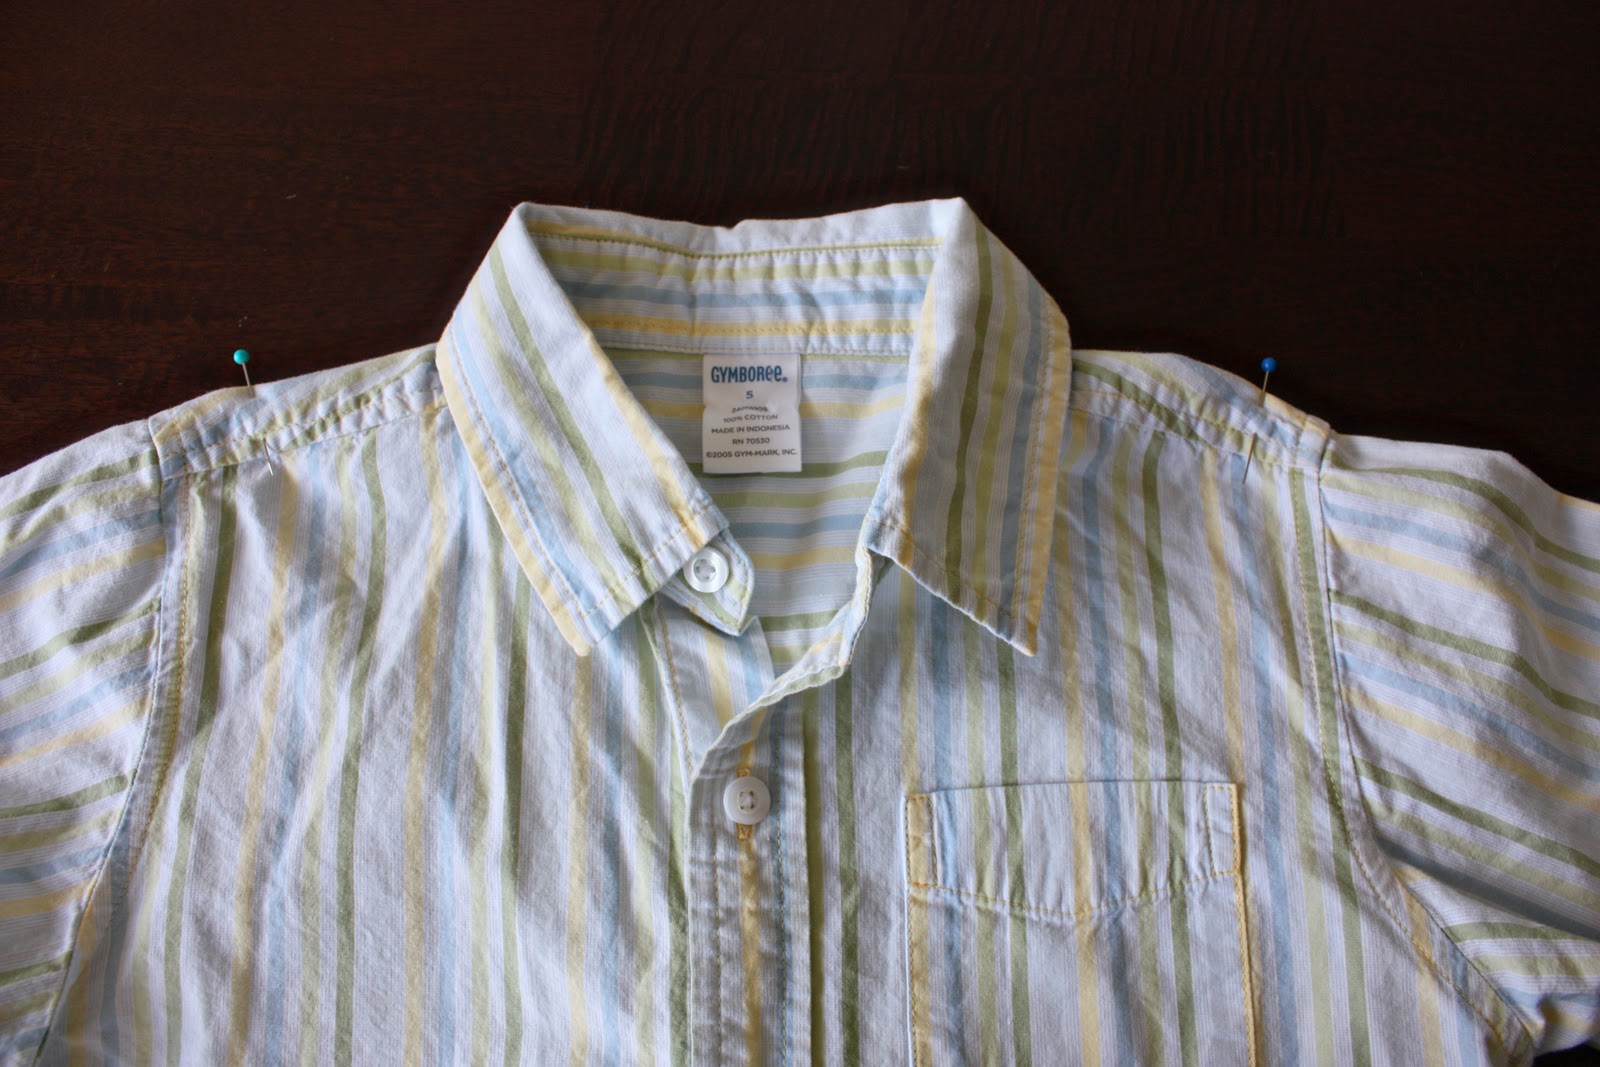 Re-purposing: Boy's Button-Up into Girl's Top with Tie | Make It and ...